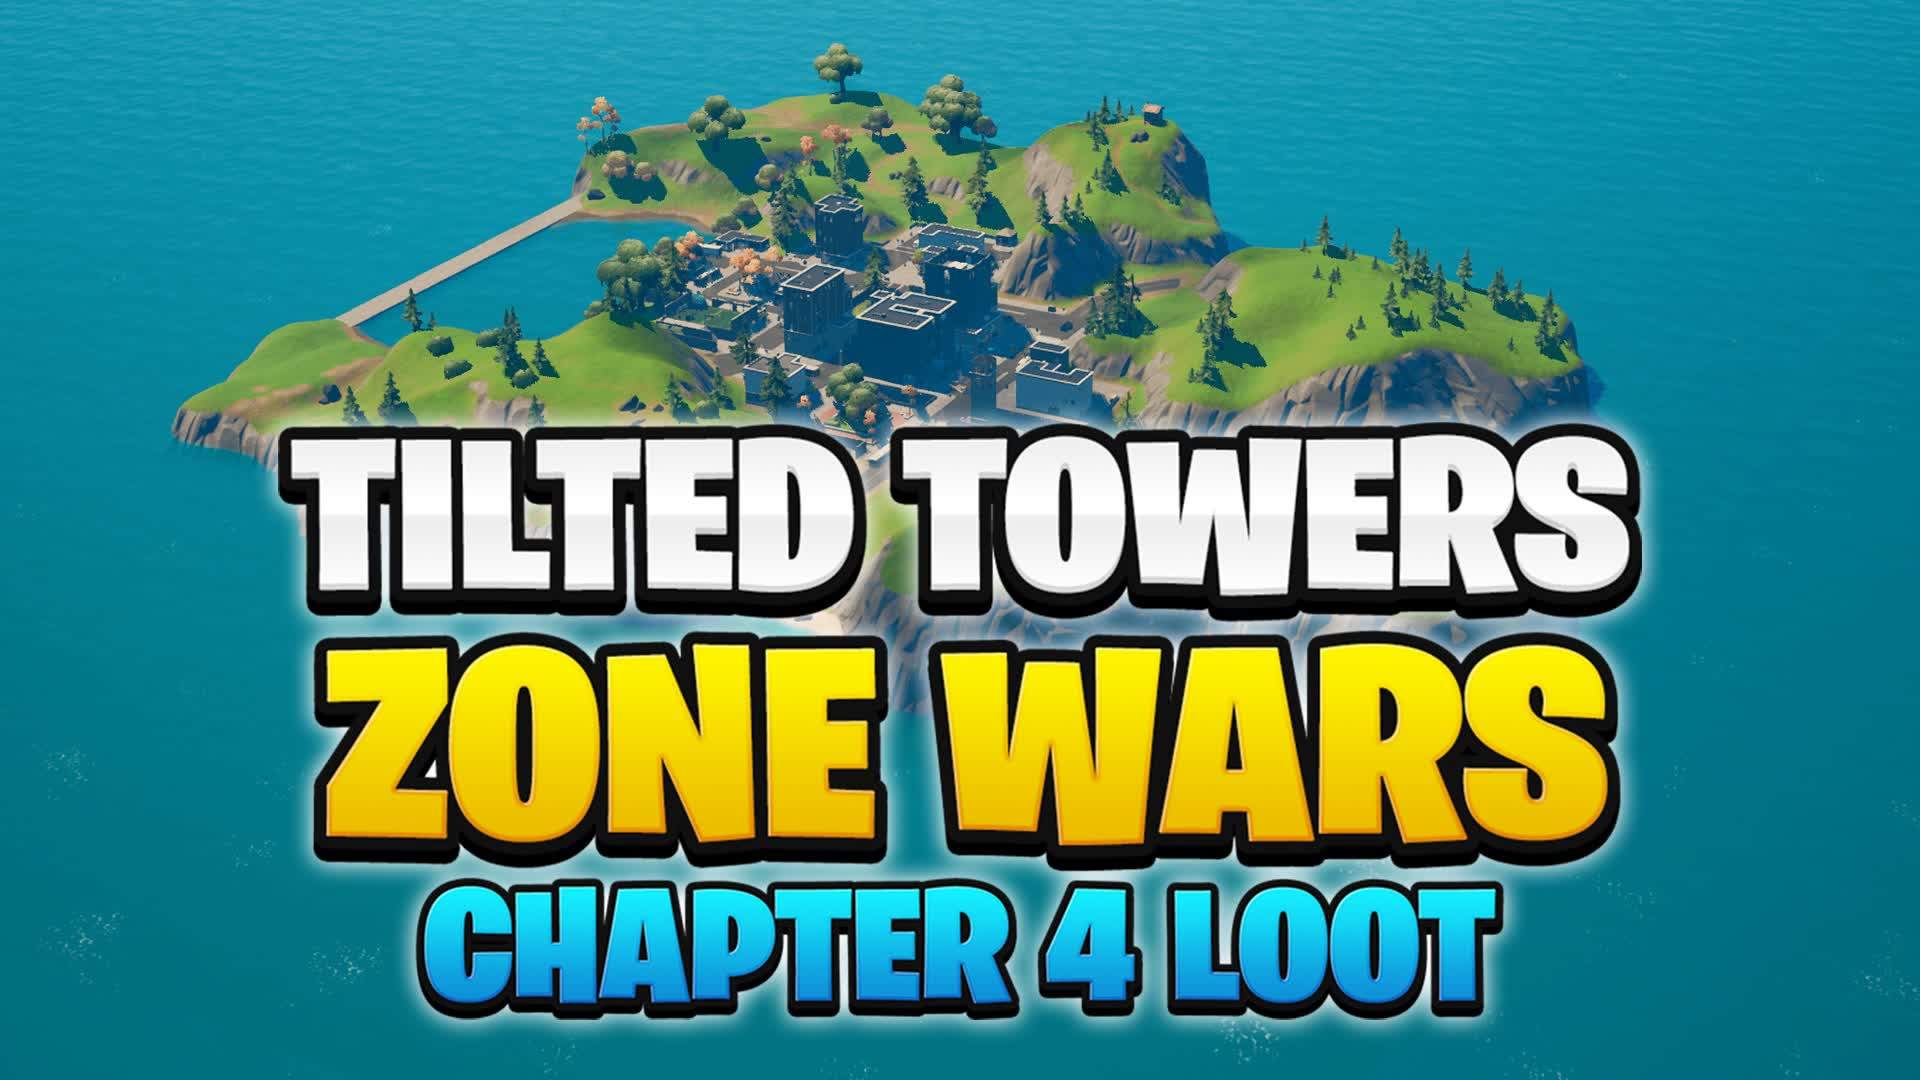 Tilted Towers Zone Wars (Chapter 4 Loot)